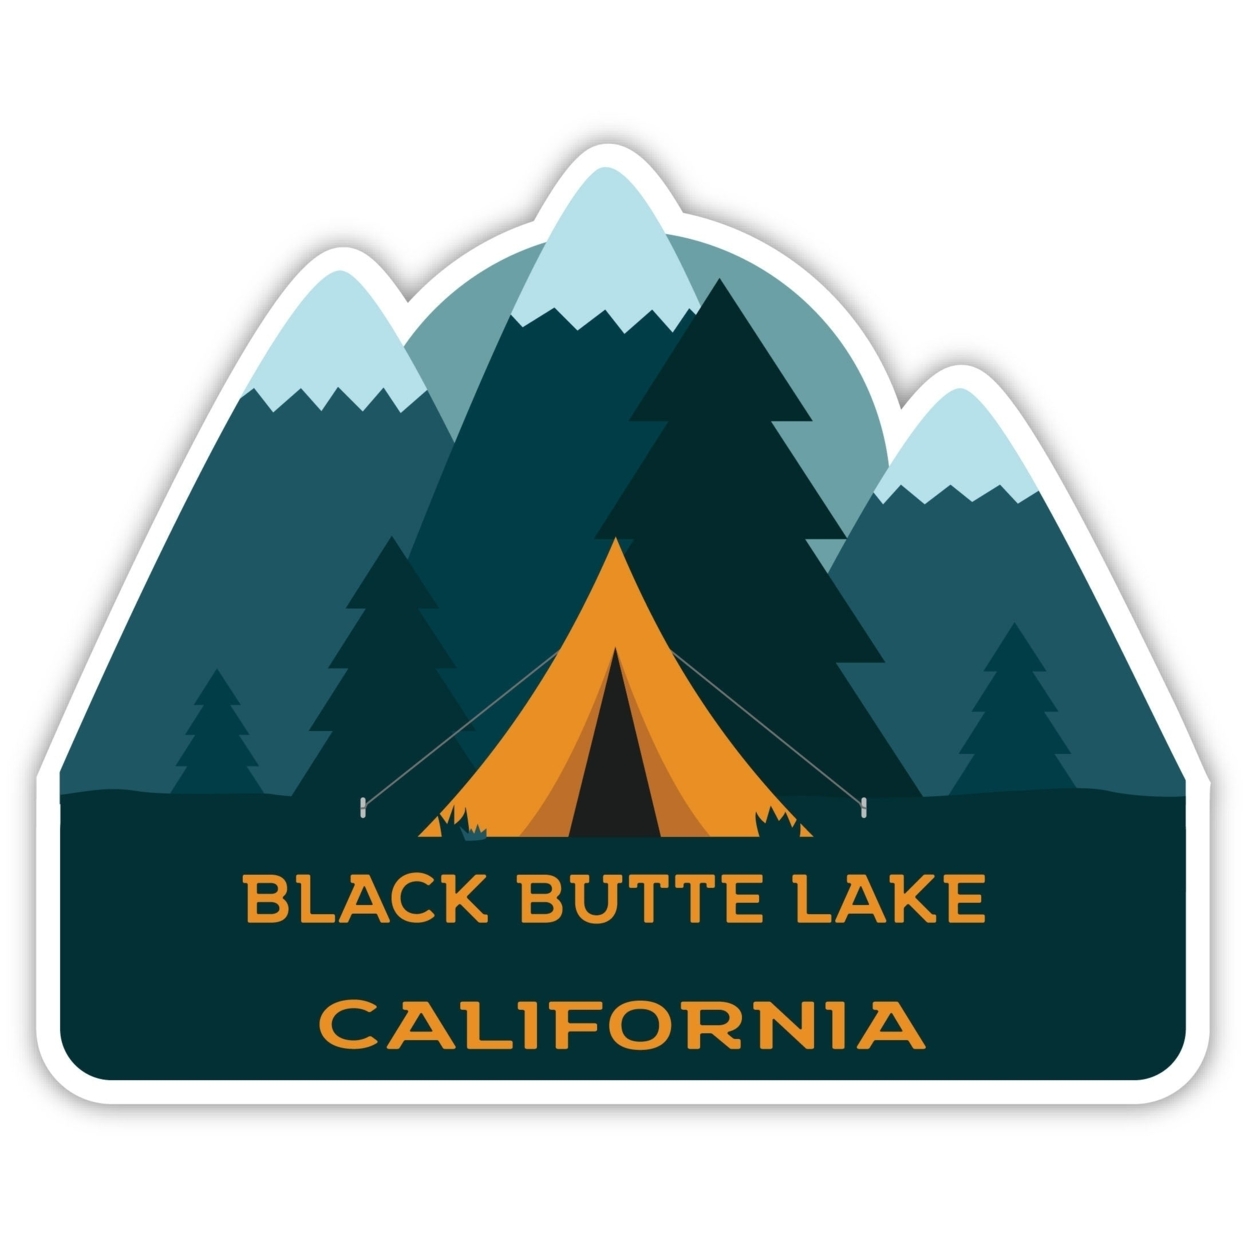 Black Butte Lake California Souvenir Decorative Stickers (Choose Theme And Size) - 4-Pack, 8-Inch, Tent